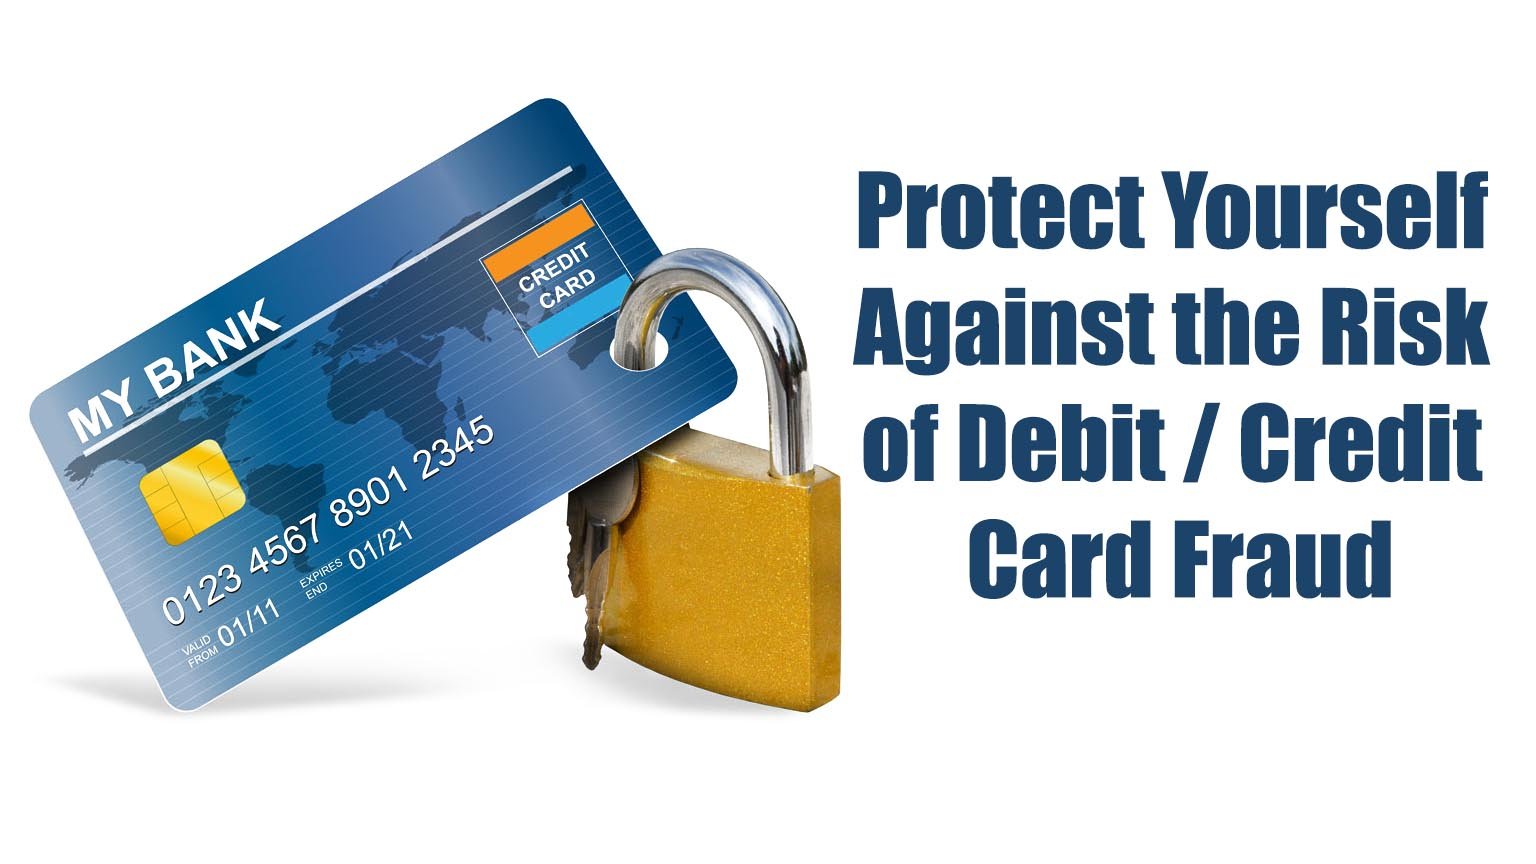 protect-yourself-against-the-risk-of-debit-credit-card-fraud